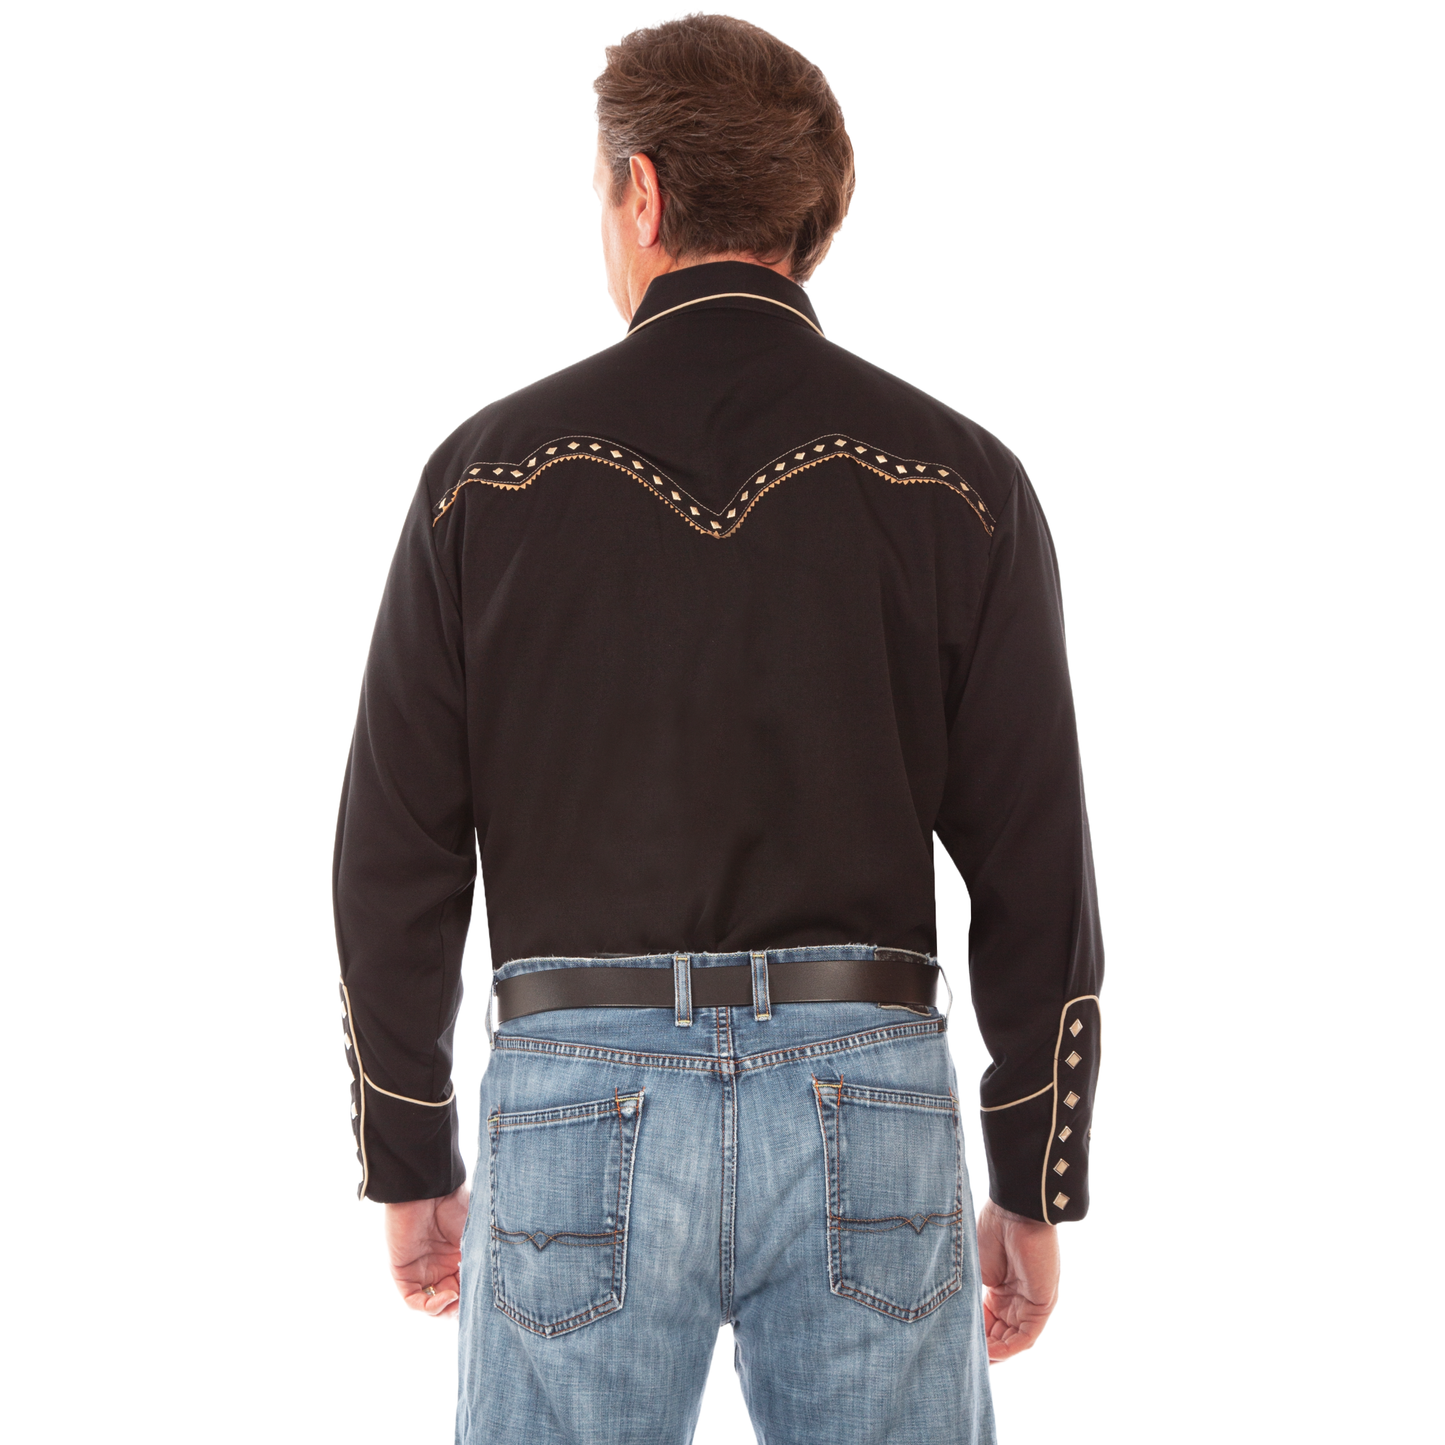 Scully Men's Studded Western Embroidered Black Snap Shirt P-898